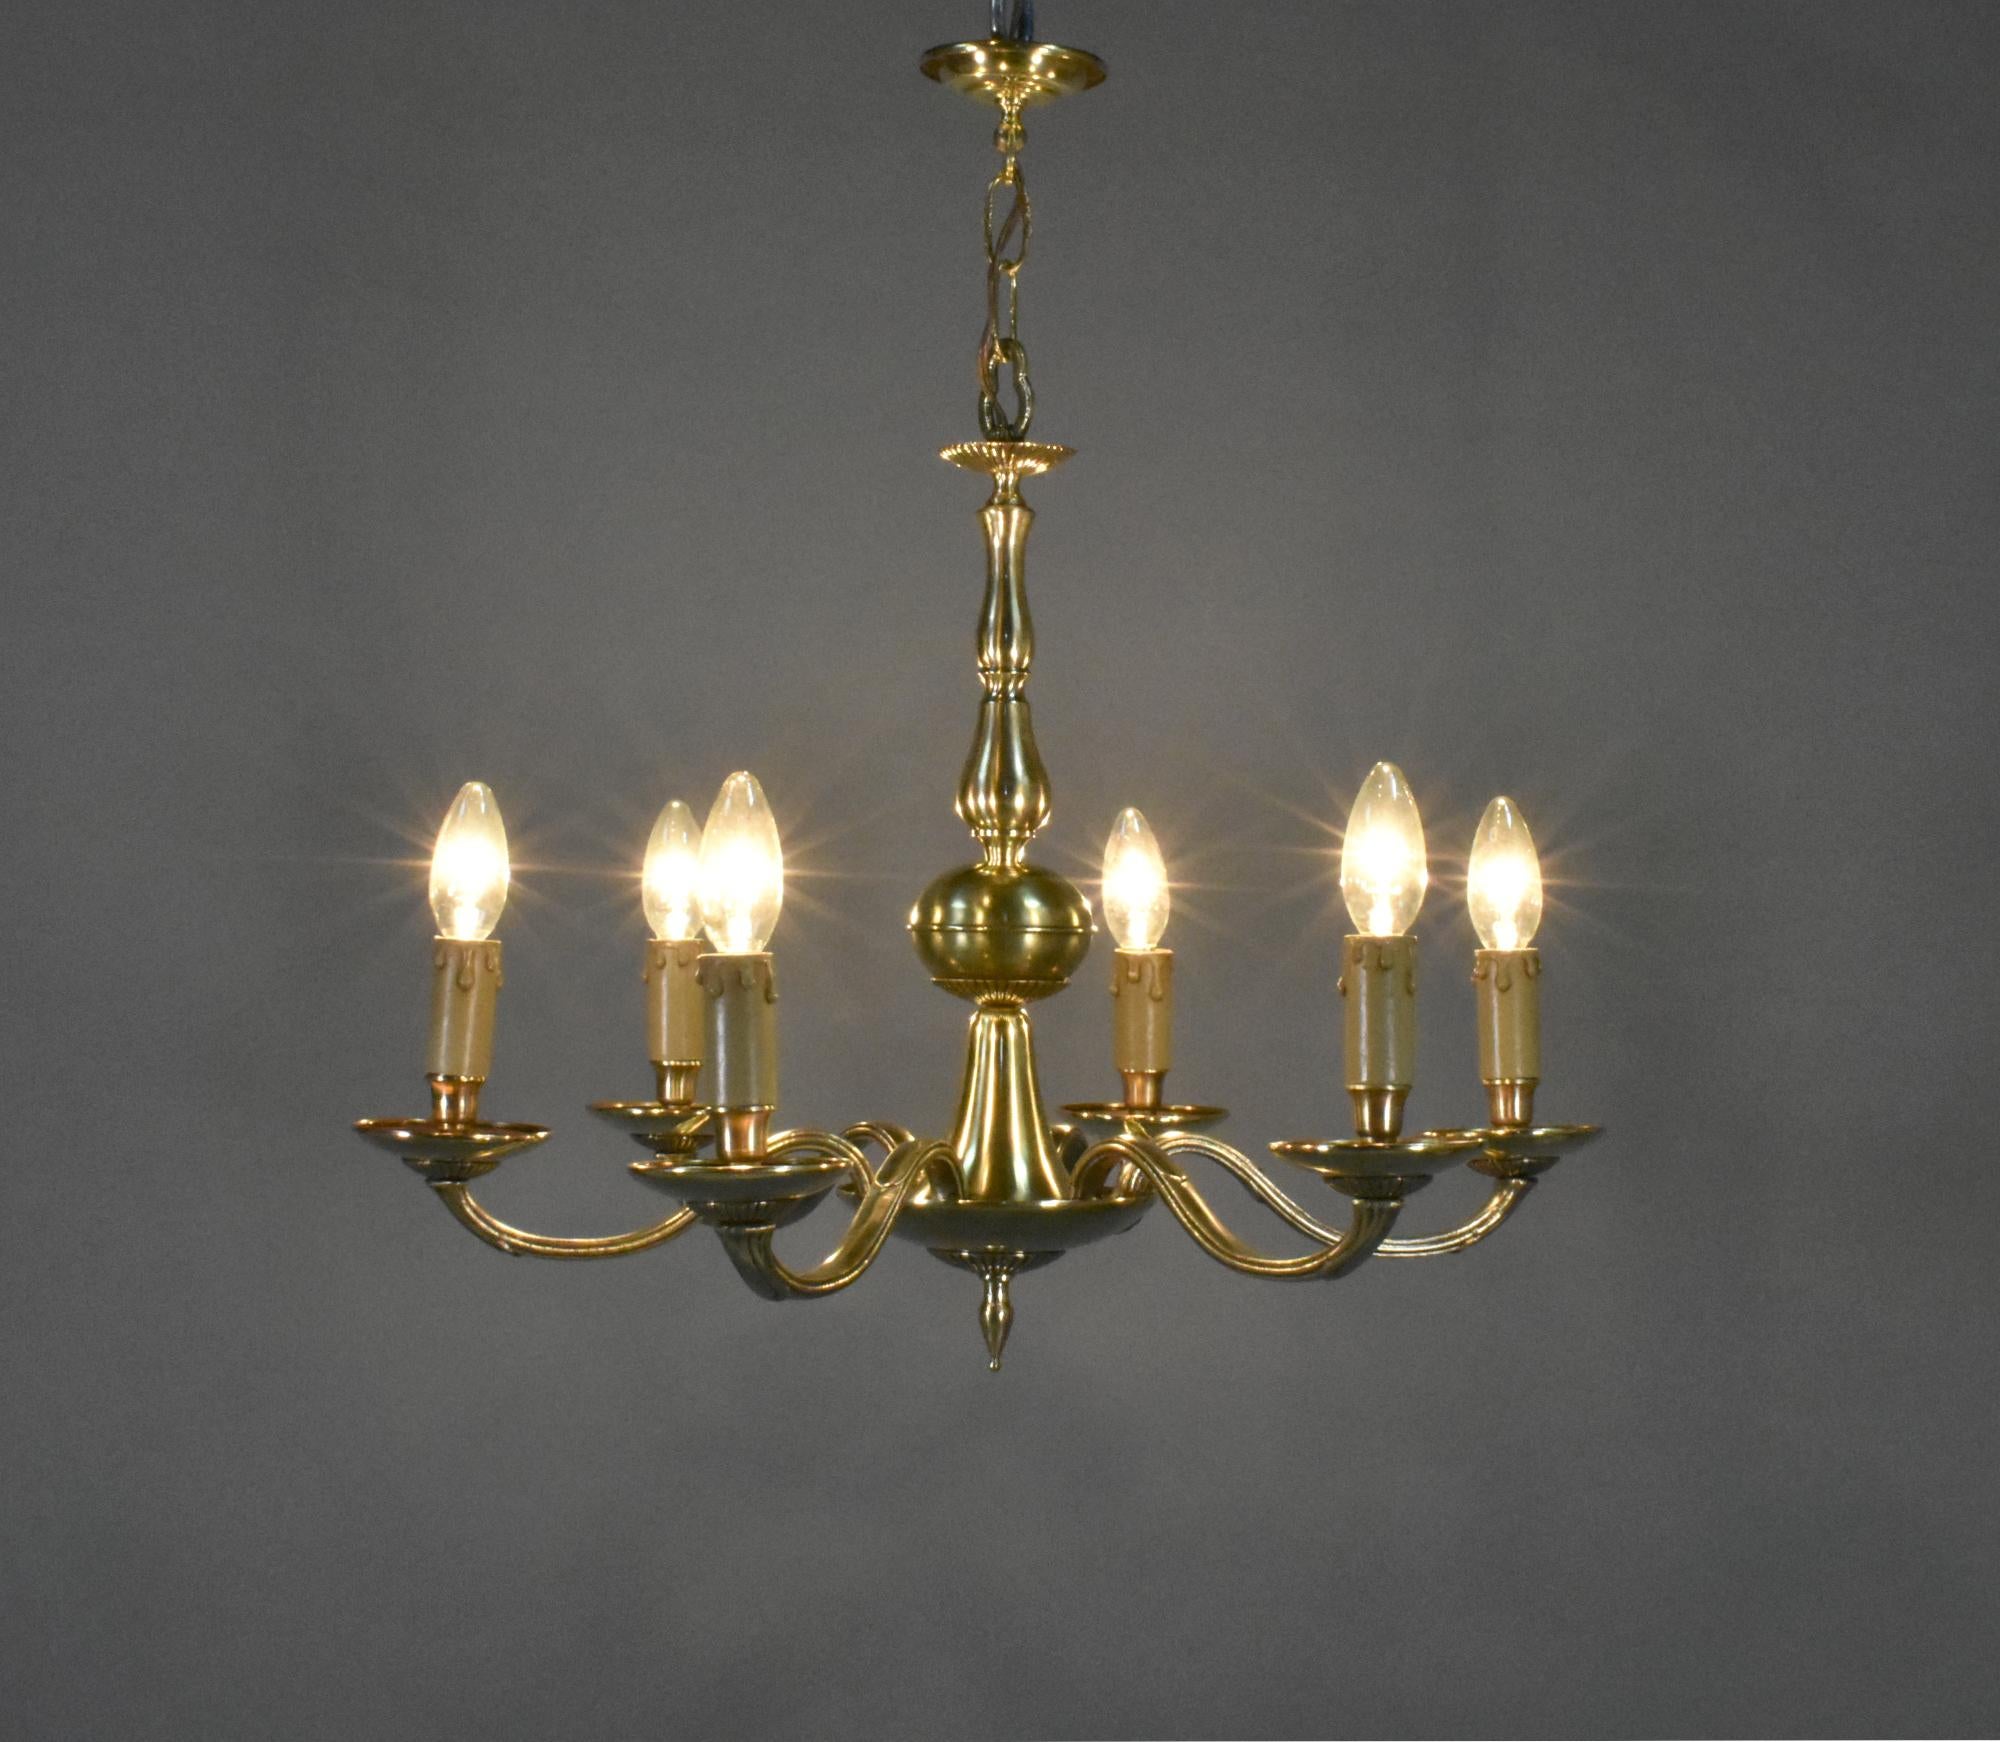 Antique French Six Light Bronze Chandelier Louis XVI Style 

This elegant six light bronze chandelier is suspended by decorative chain links from the ceiling rose. 

The central turned column leads down to the upward facing dish with gently curving